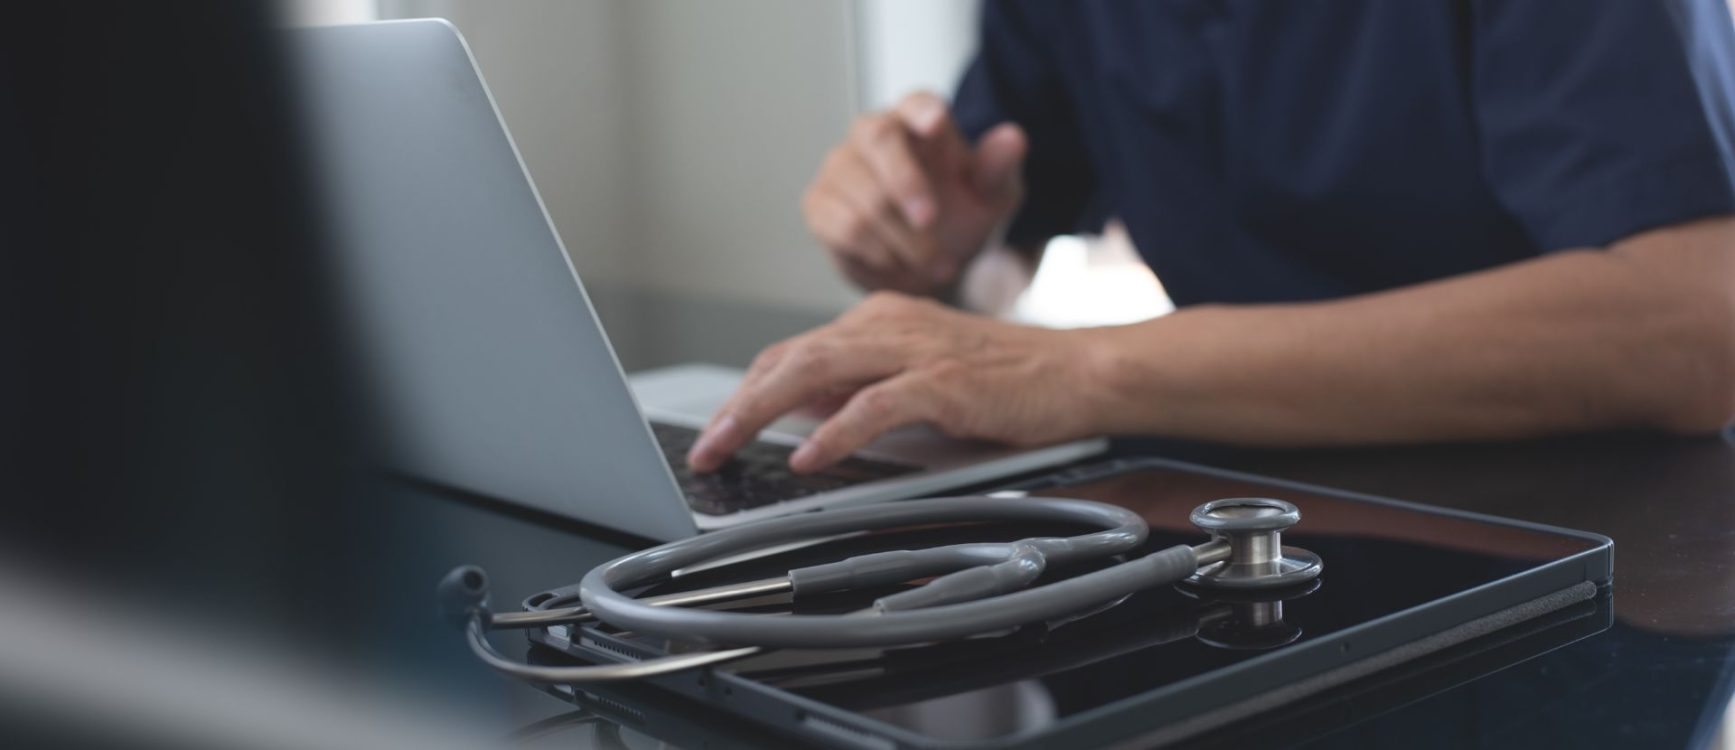 Close up shot of medical professional on a laptop; medical equipment in foreground.